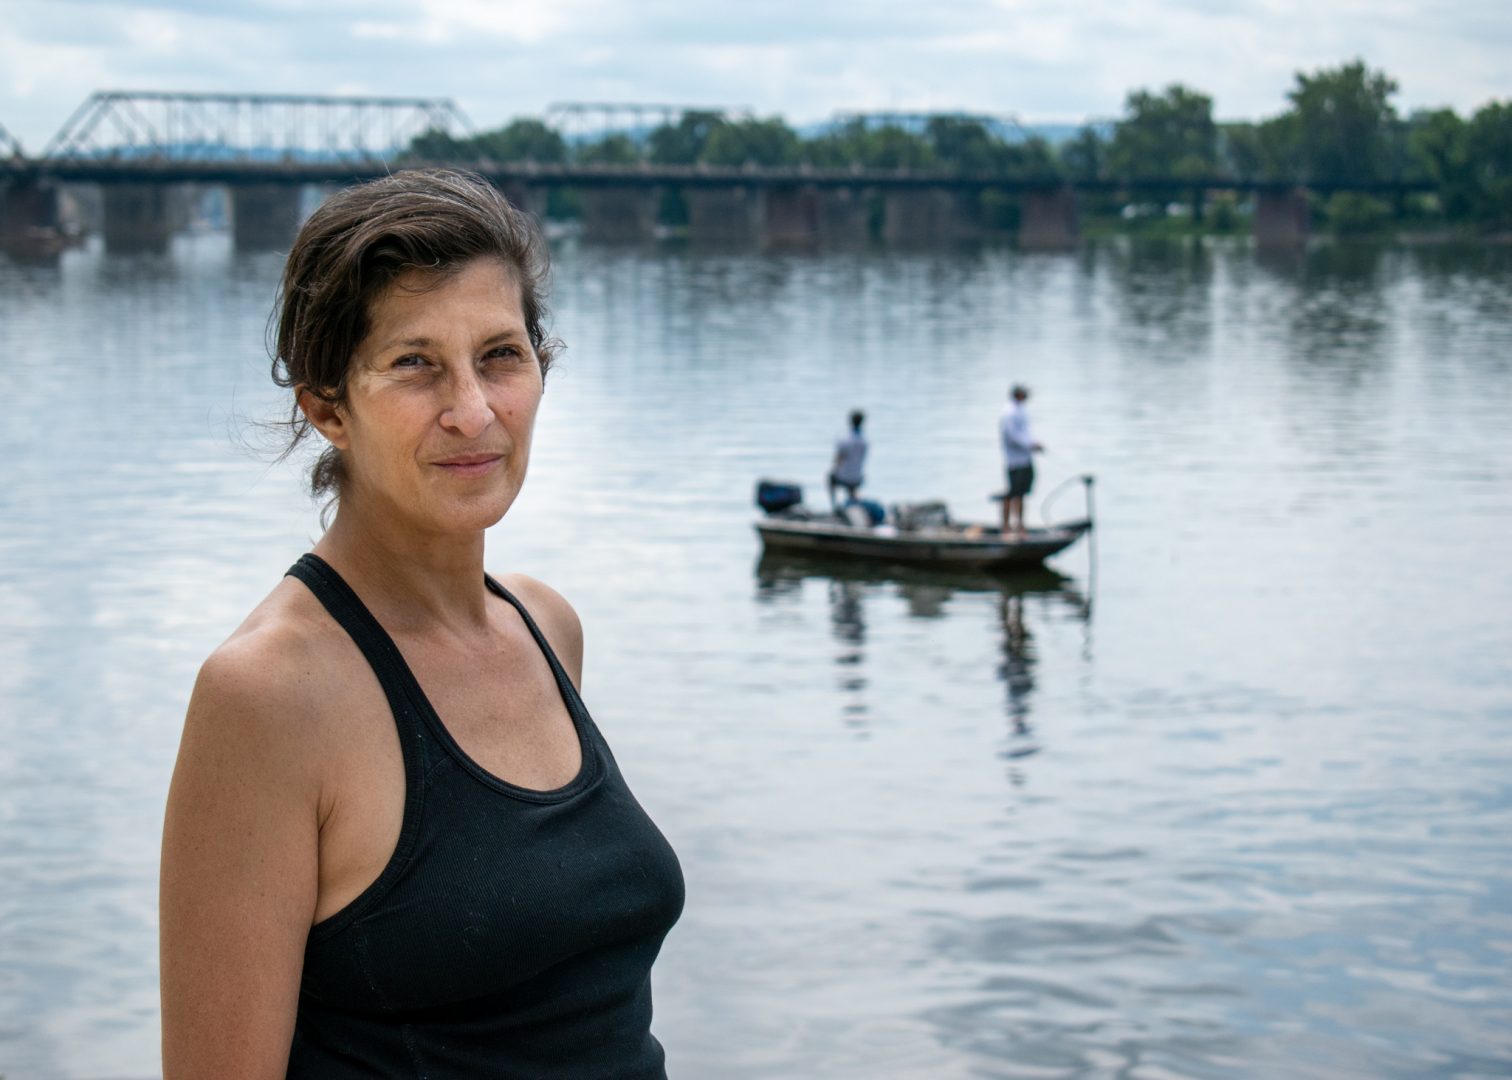 Ilyse Kazar stands along the Susquehanna river in Harrisburg next to a stormwater outflow while anglers fish nearby. Kazar, of Harrisburg, is one of the volunteers who collected water samples as part of the Lower Susquehanna Riverkeeper's annual water monitoring. 